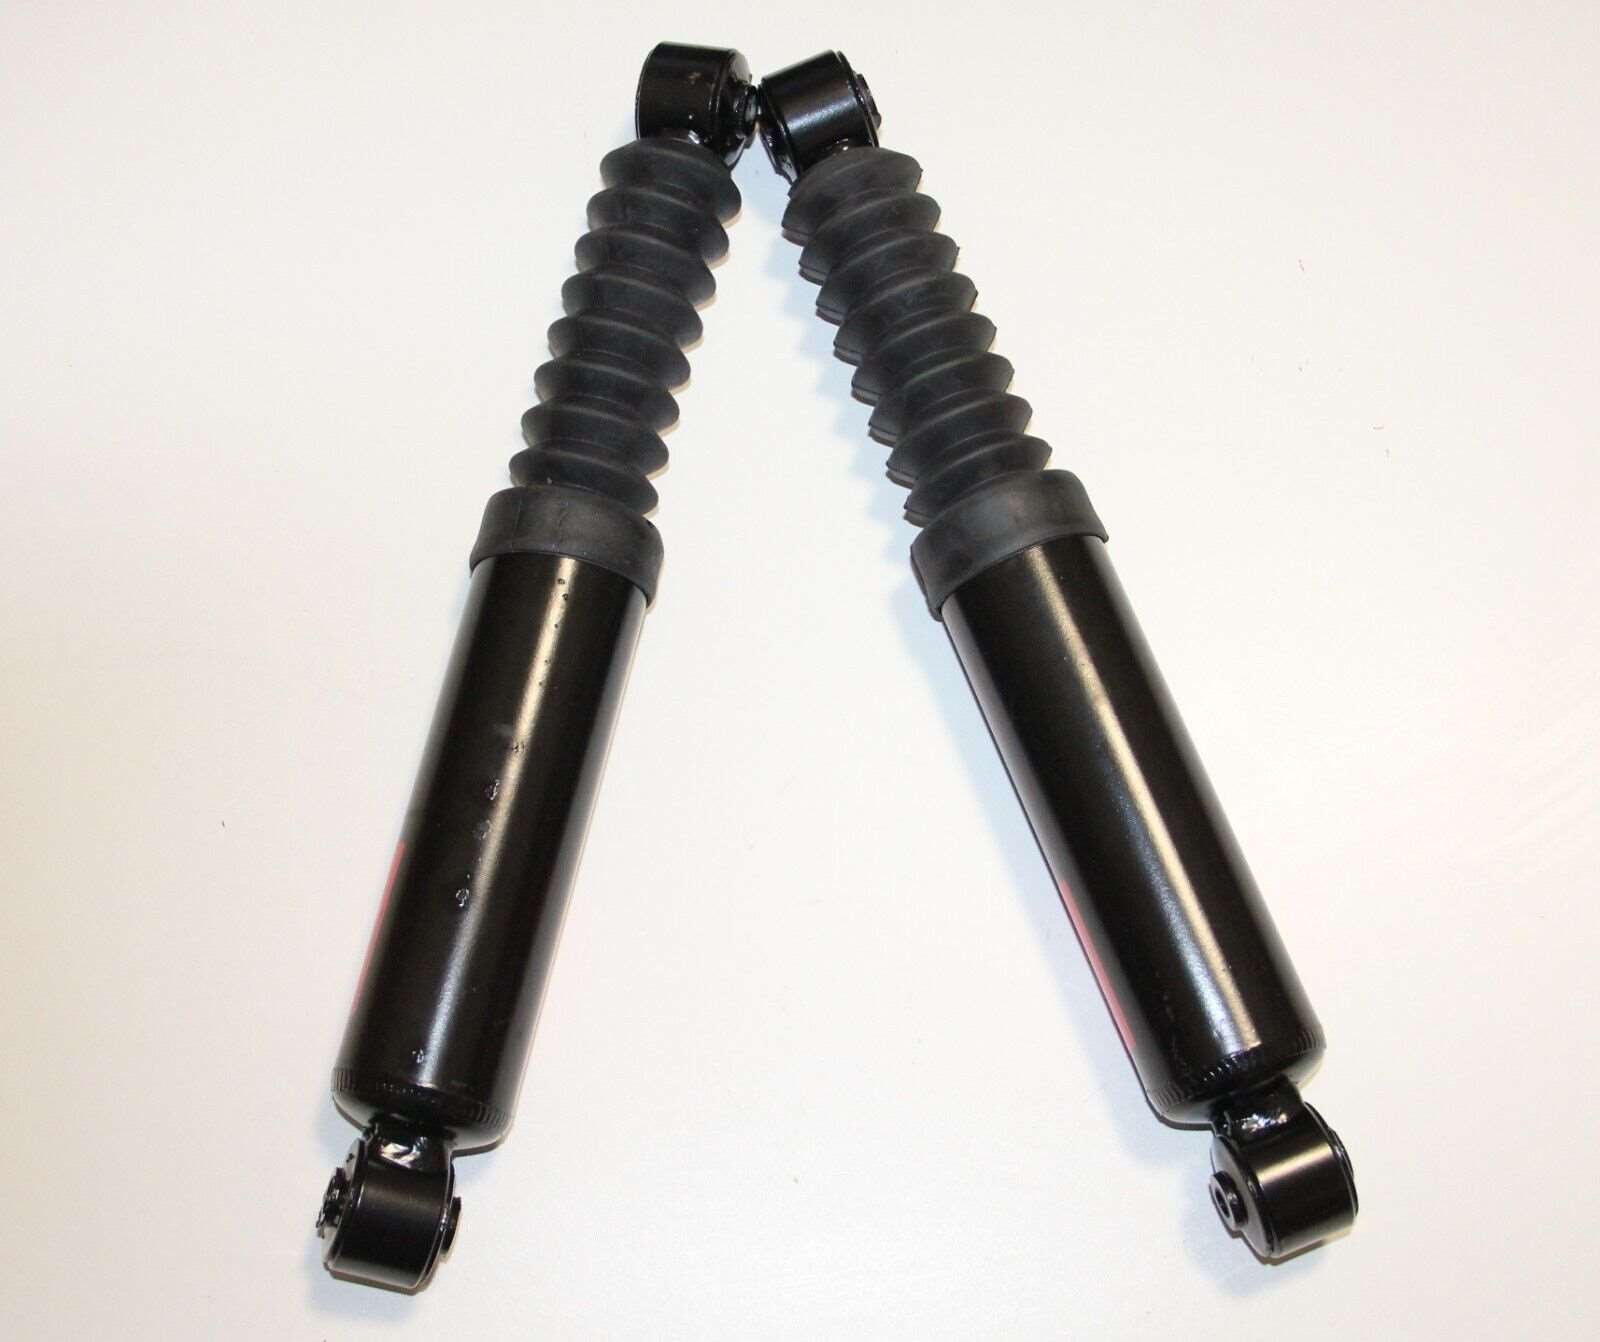 2 x LANCIA FULVIA COUPE FRONT SHOCK ABSORBERS GAS SUSPENSION KIT Made in Italy